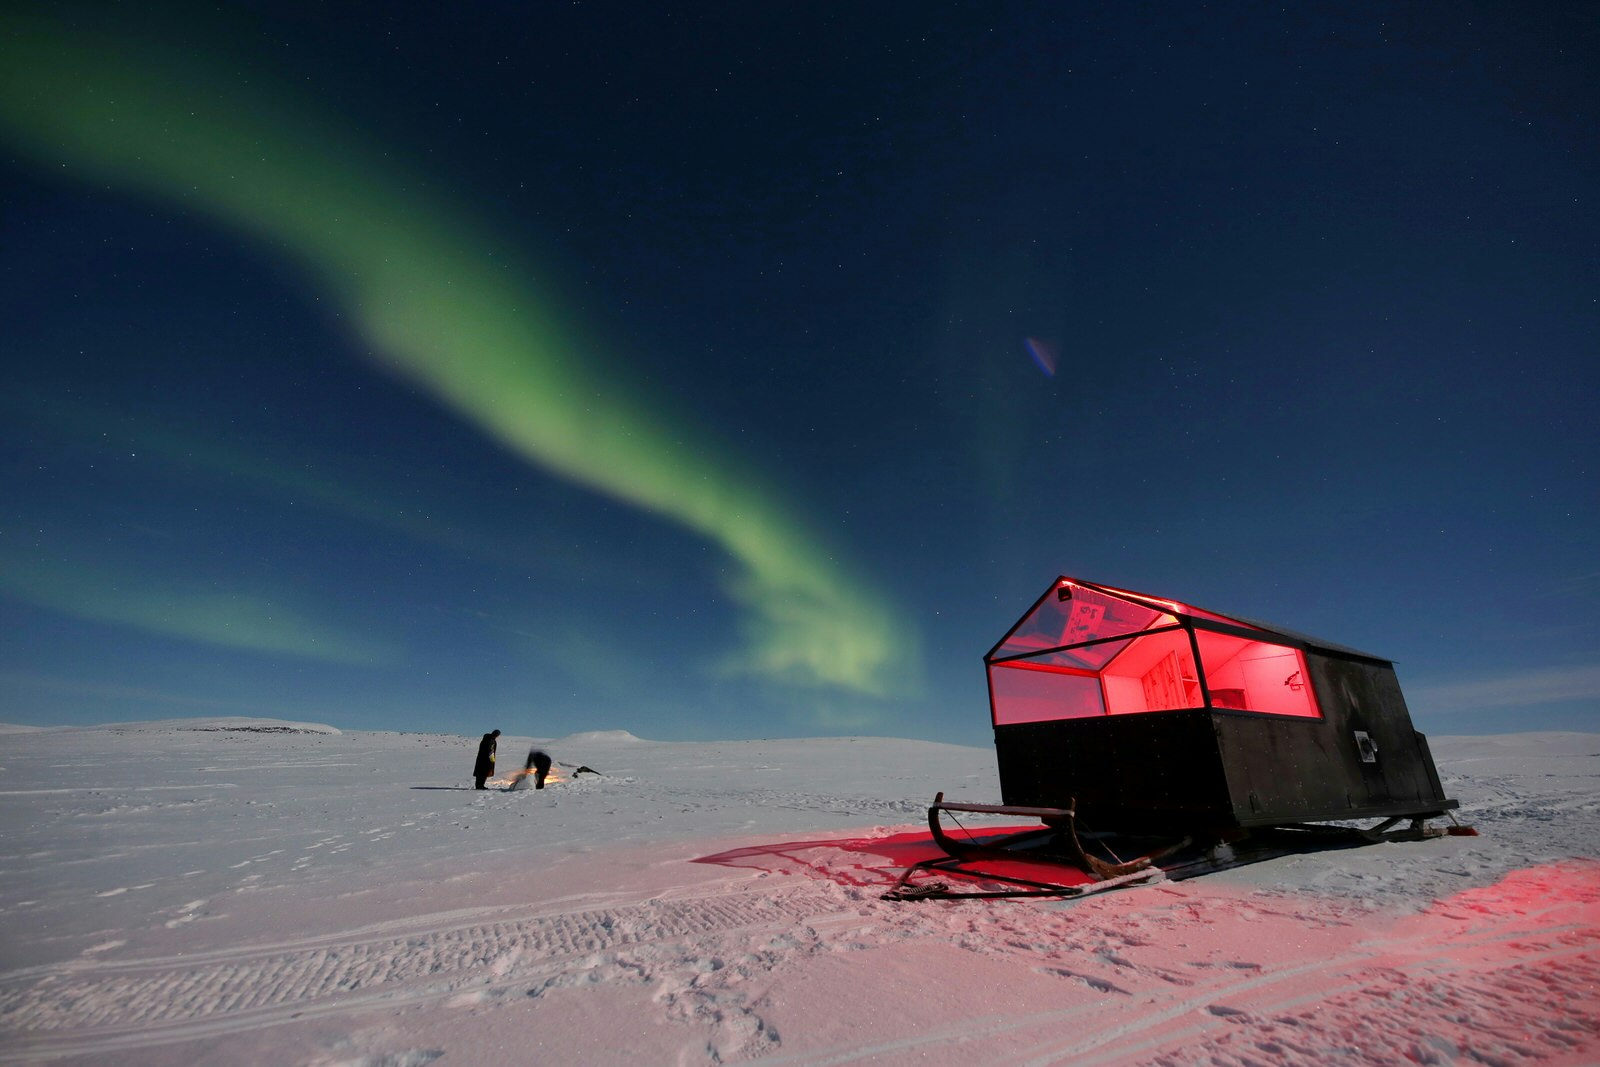 A small hut with a clear roof stands on large skis in the middle of a snowy, bare landscape with the Northern Lights in the sky and two people standing the background.